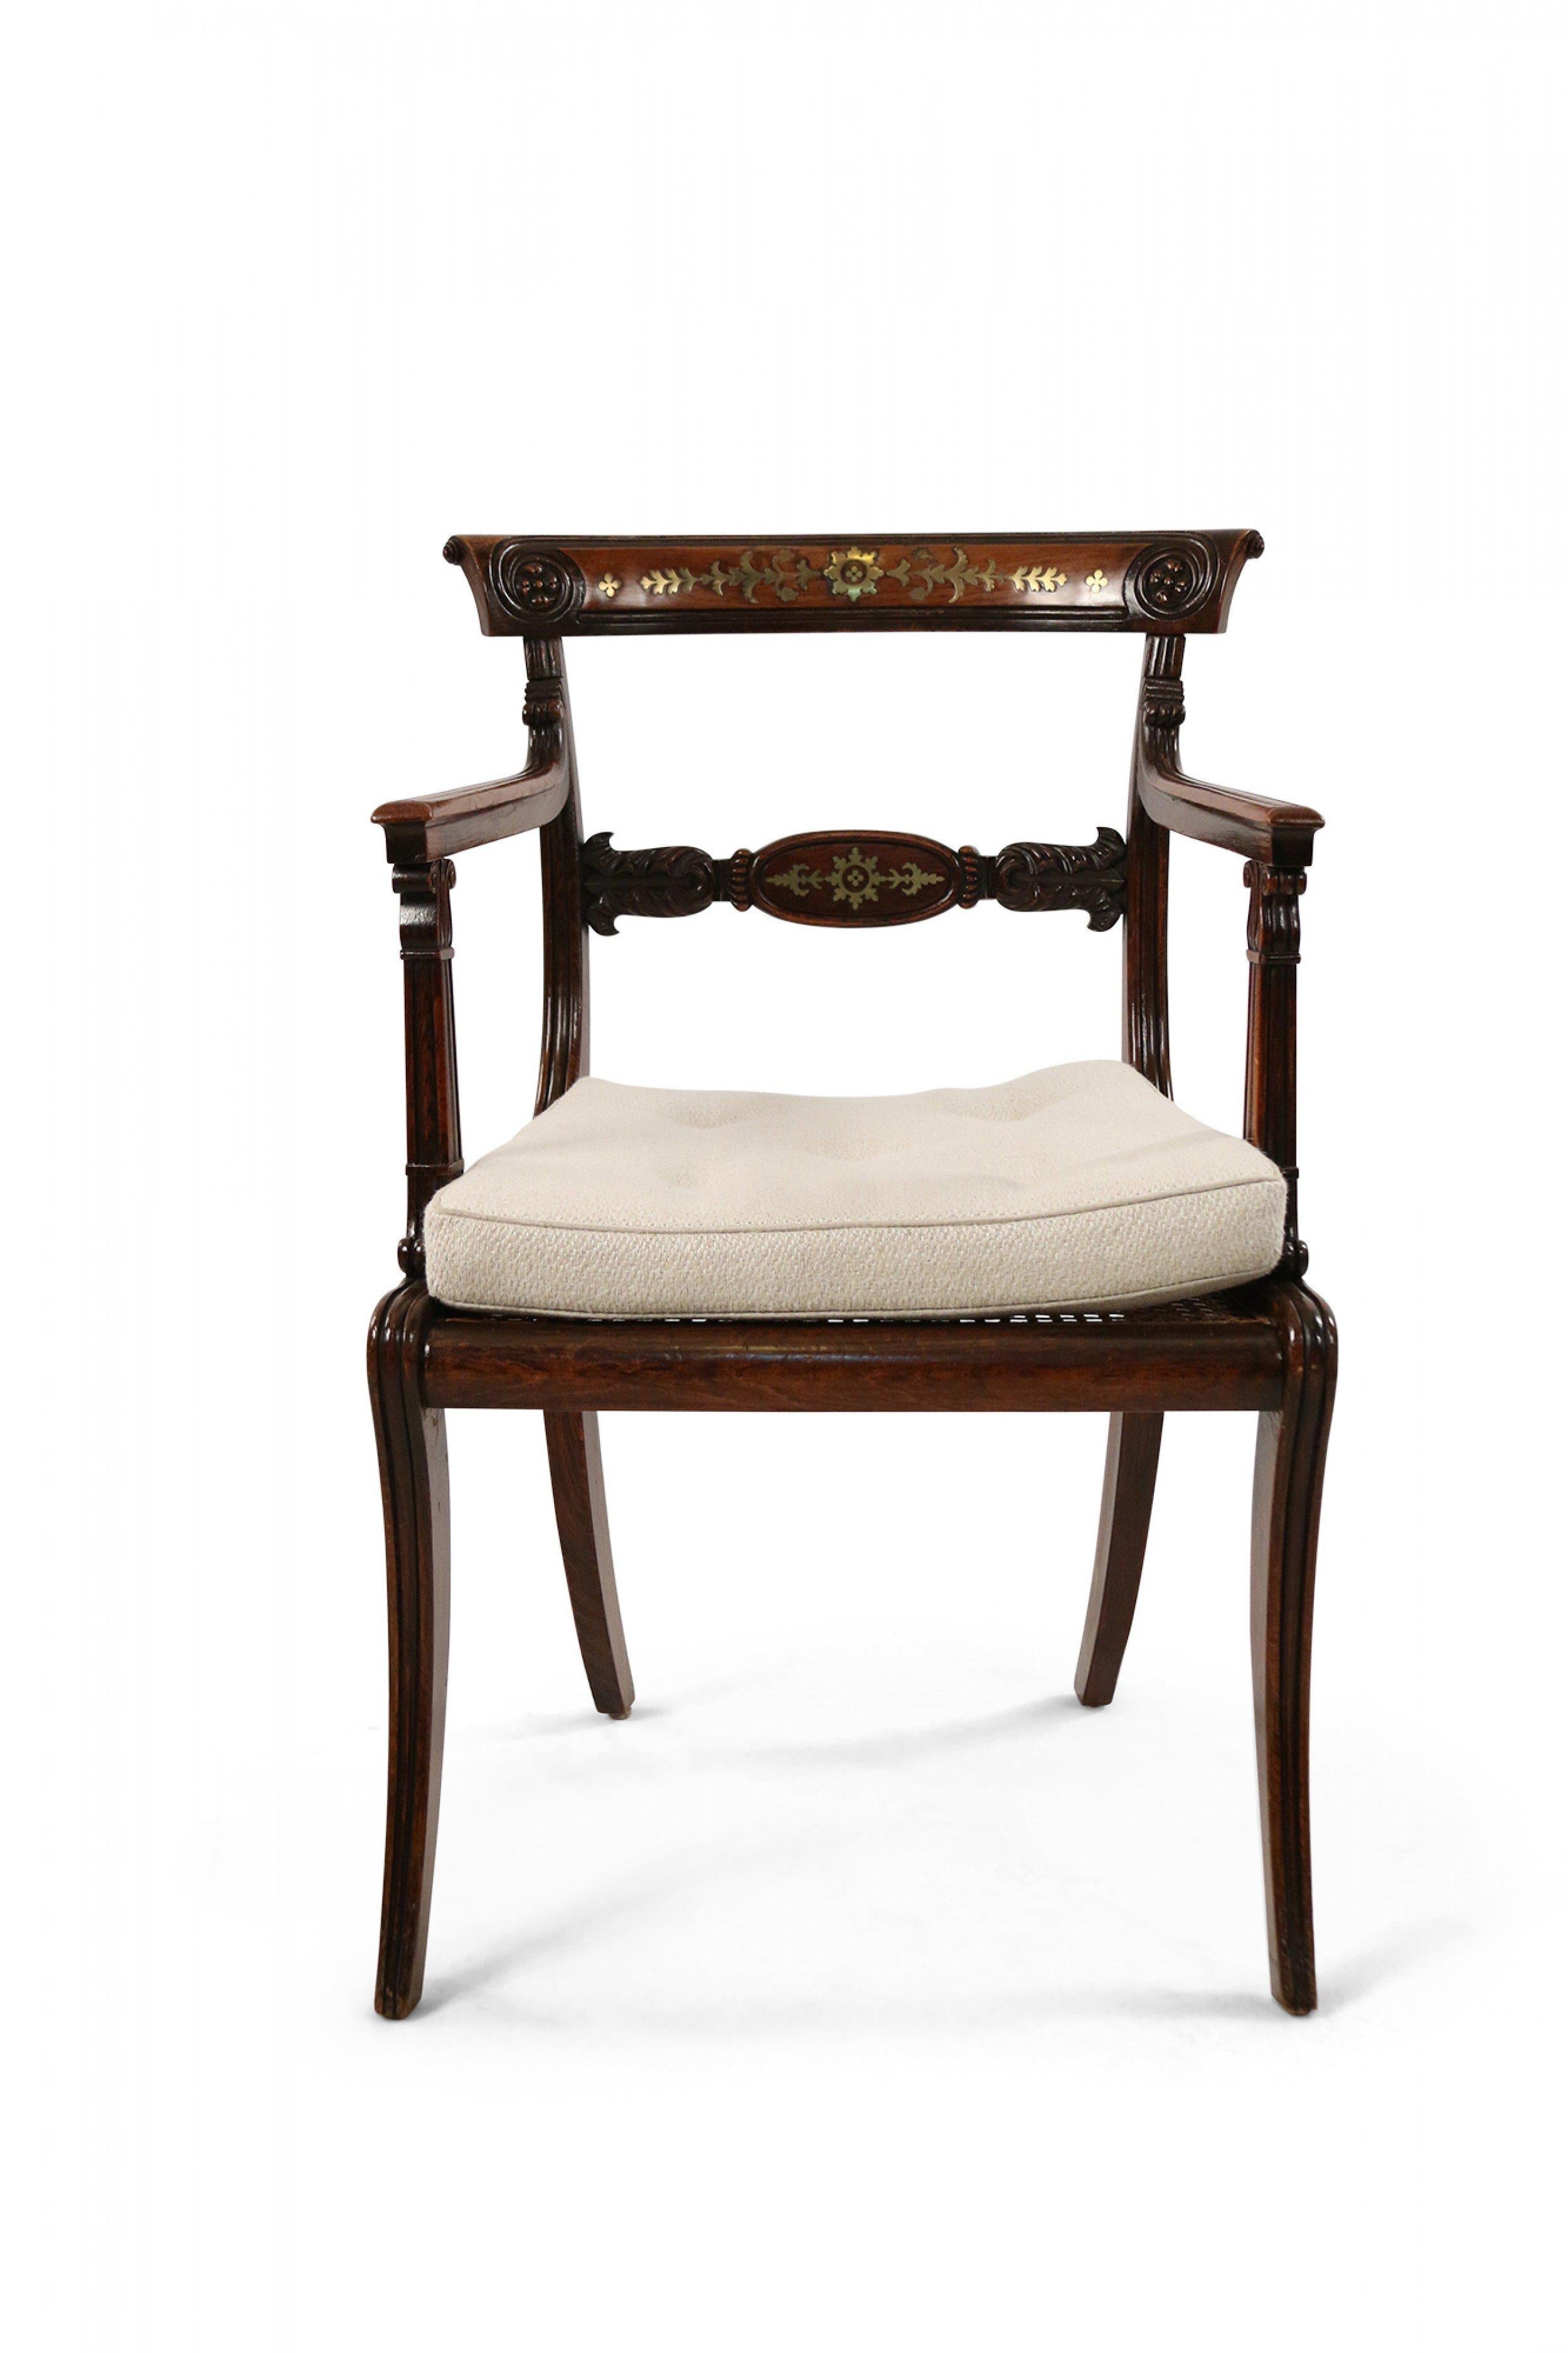 Pair of English Regency stained oak armchair with floral brass inlay pattern, carved detail, cane seat, and removable beige tufted and upholstered seat cushion.